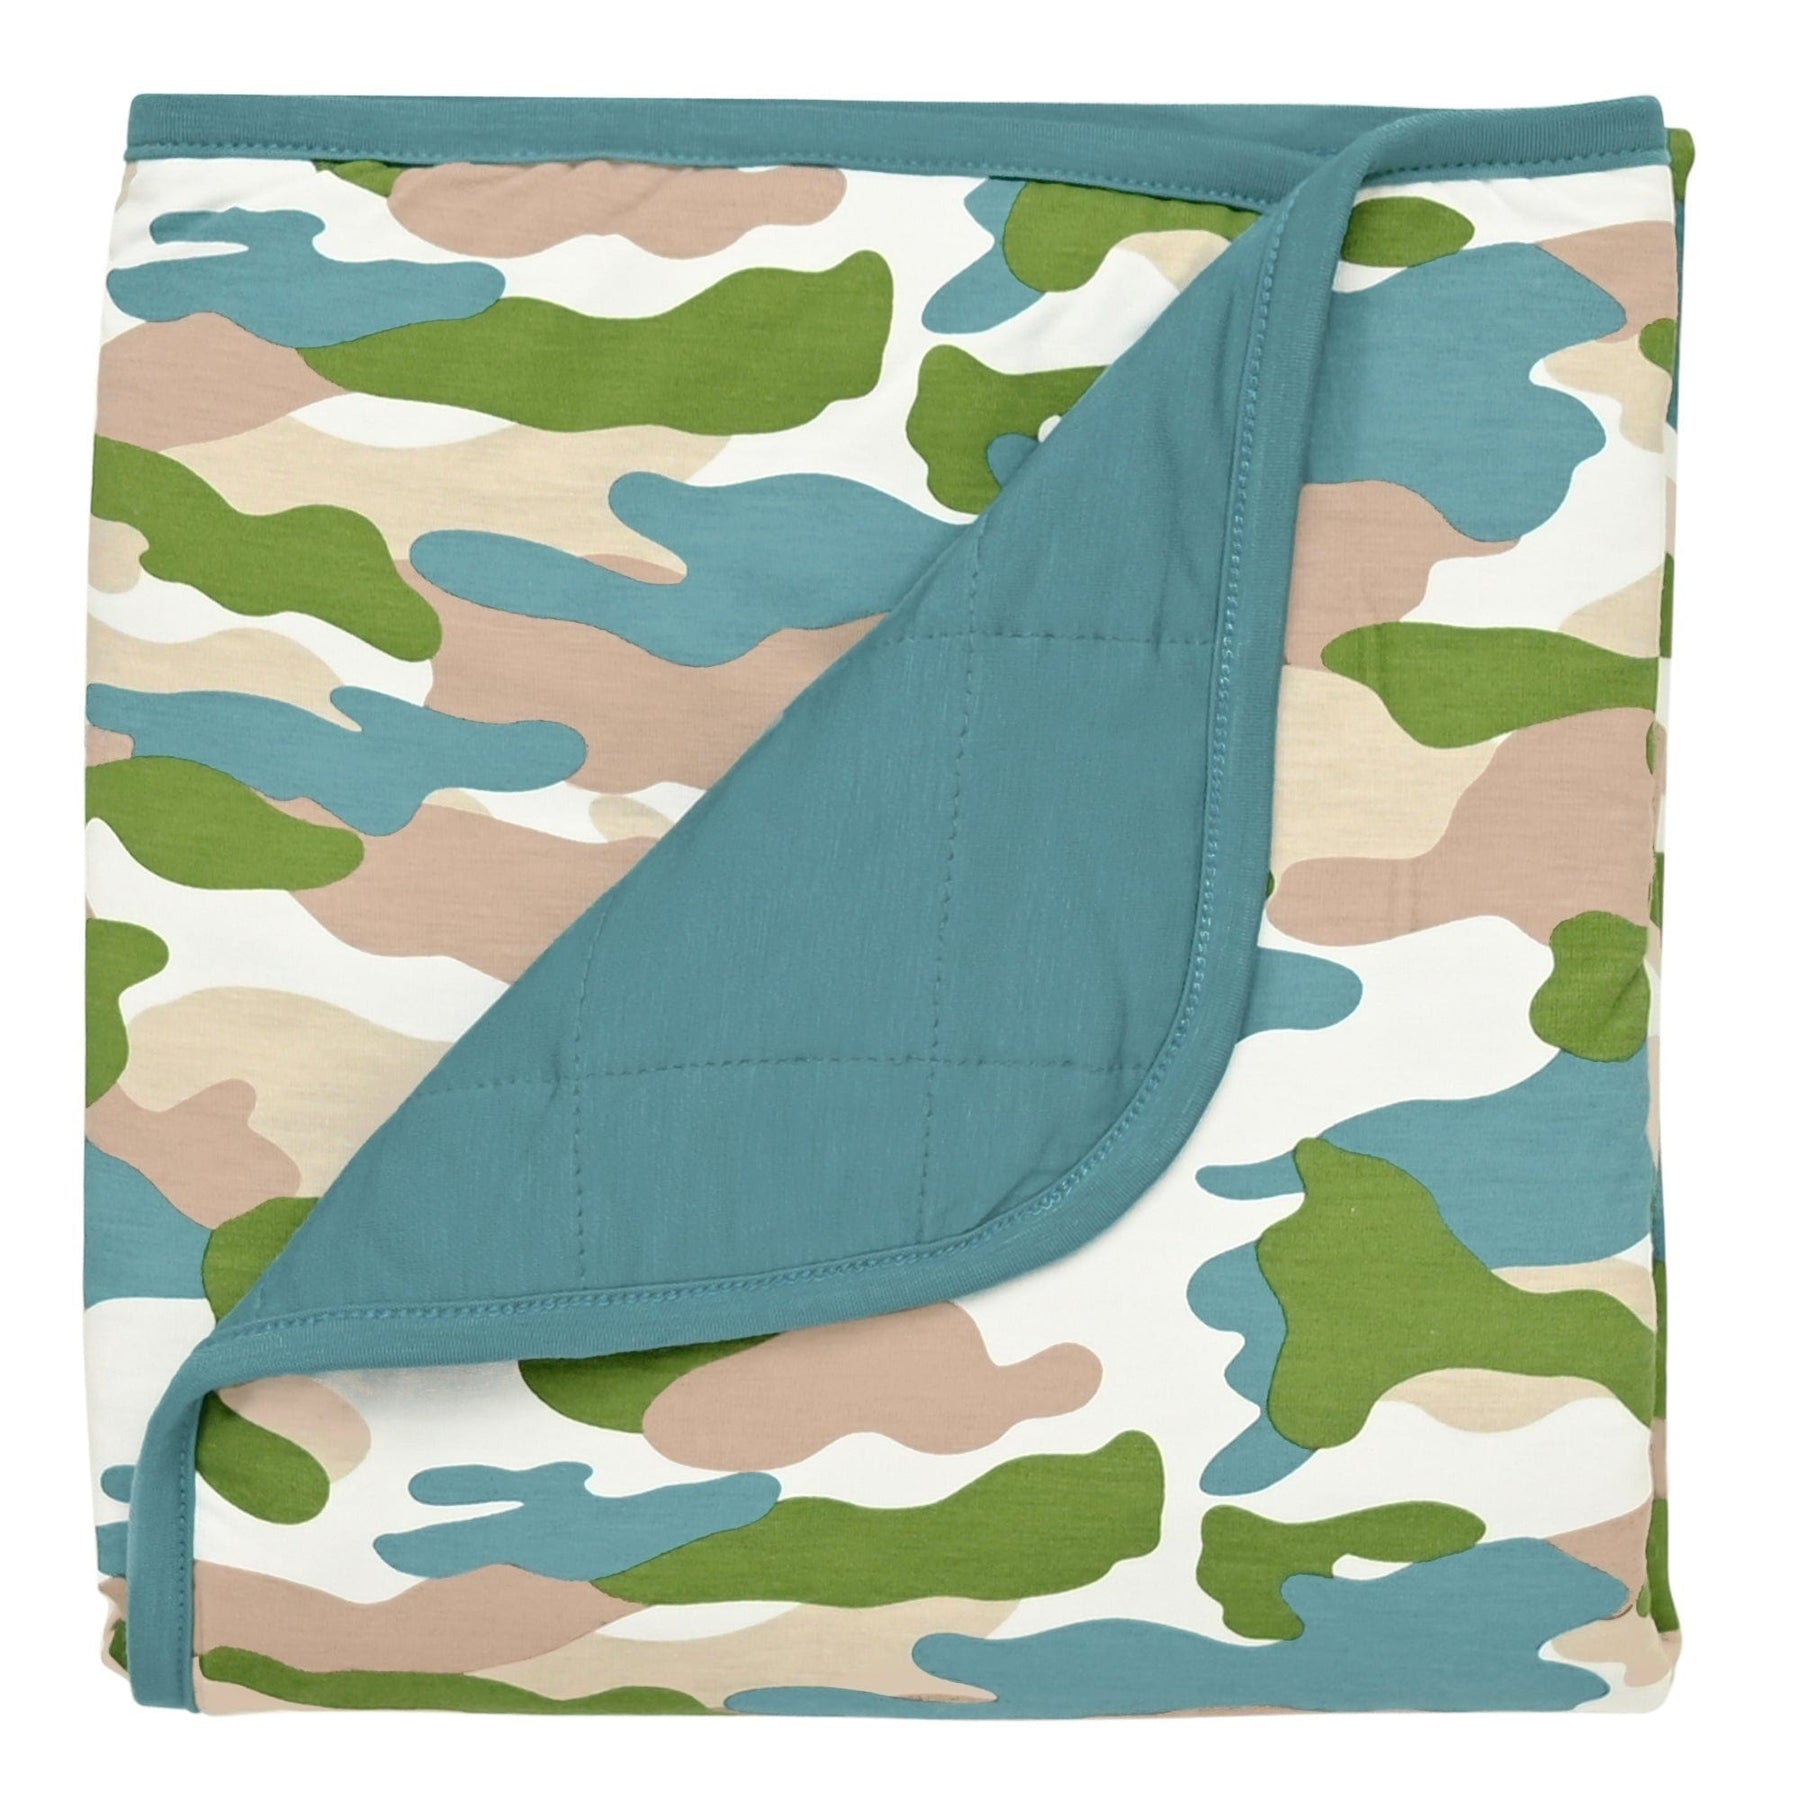 Kyte BABY Baby Blanket in Camo